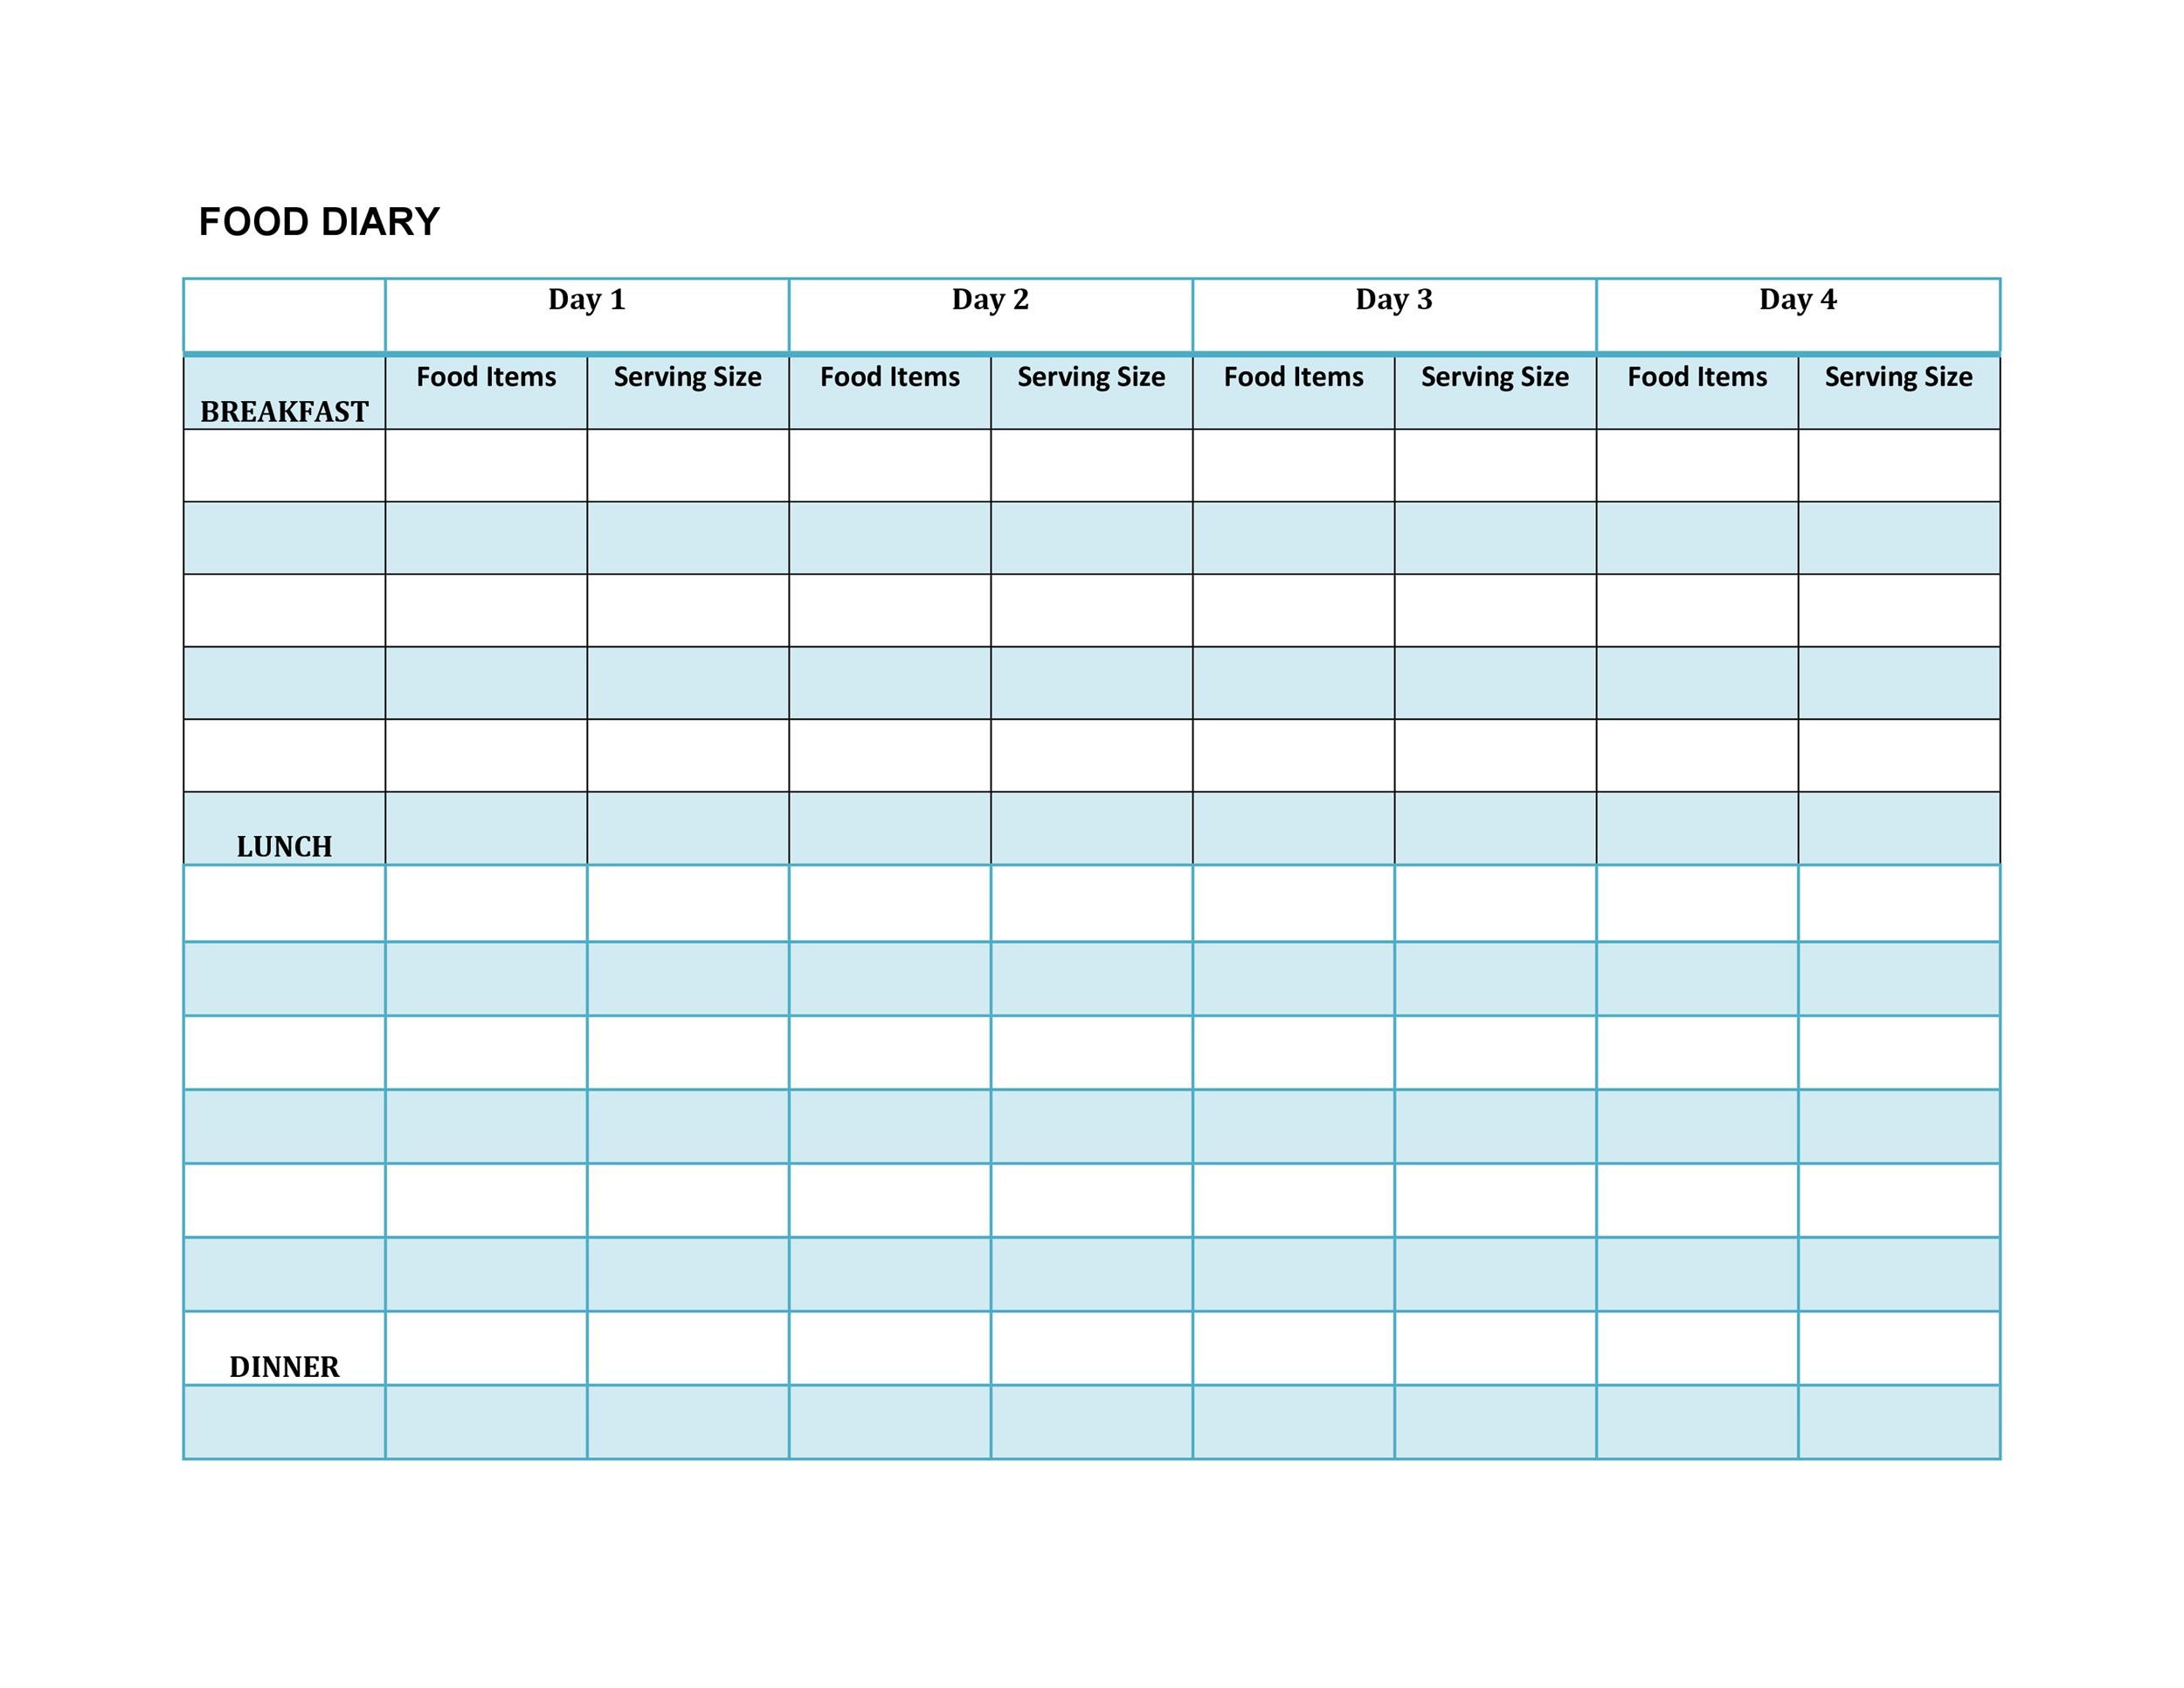 40 Simple Food Diary Templates & Food Log Examples